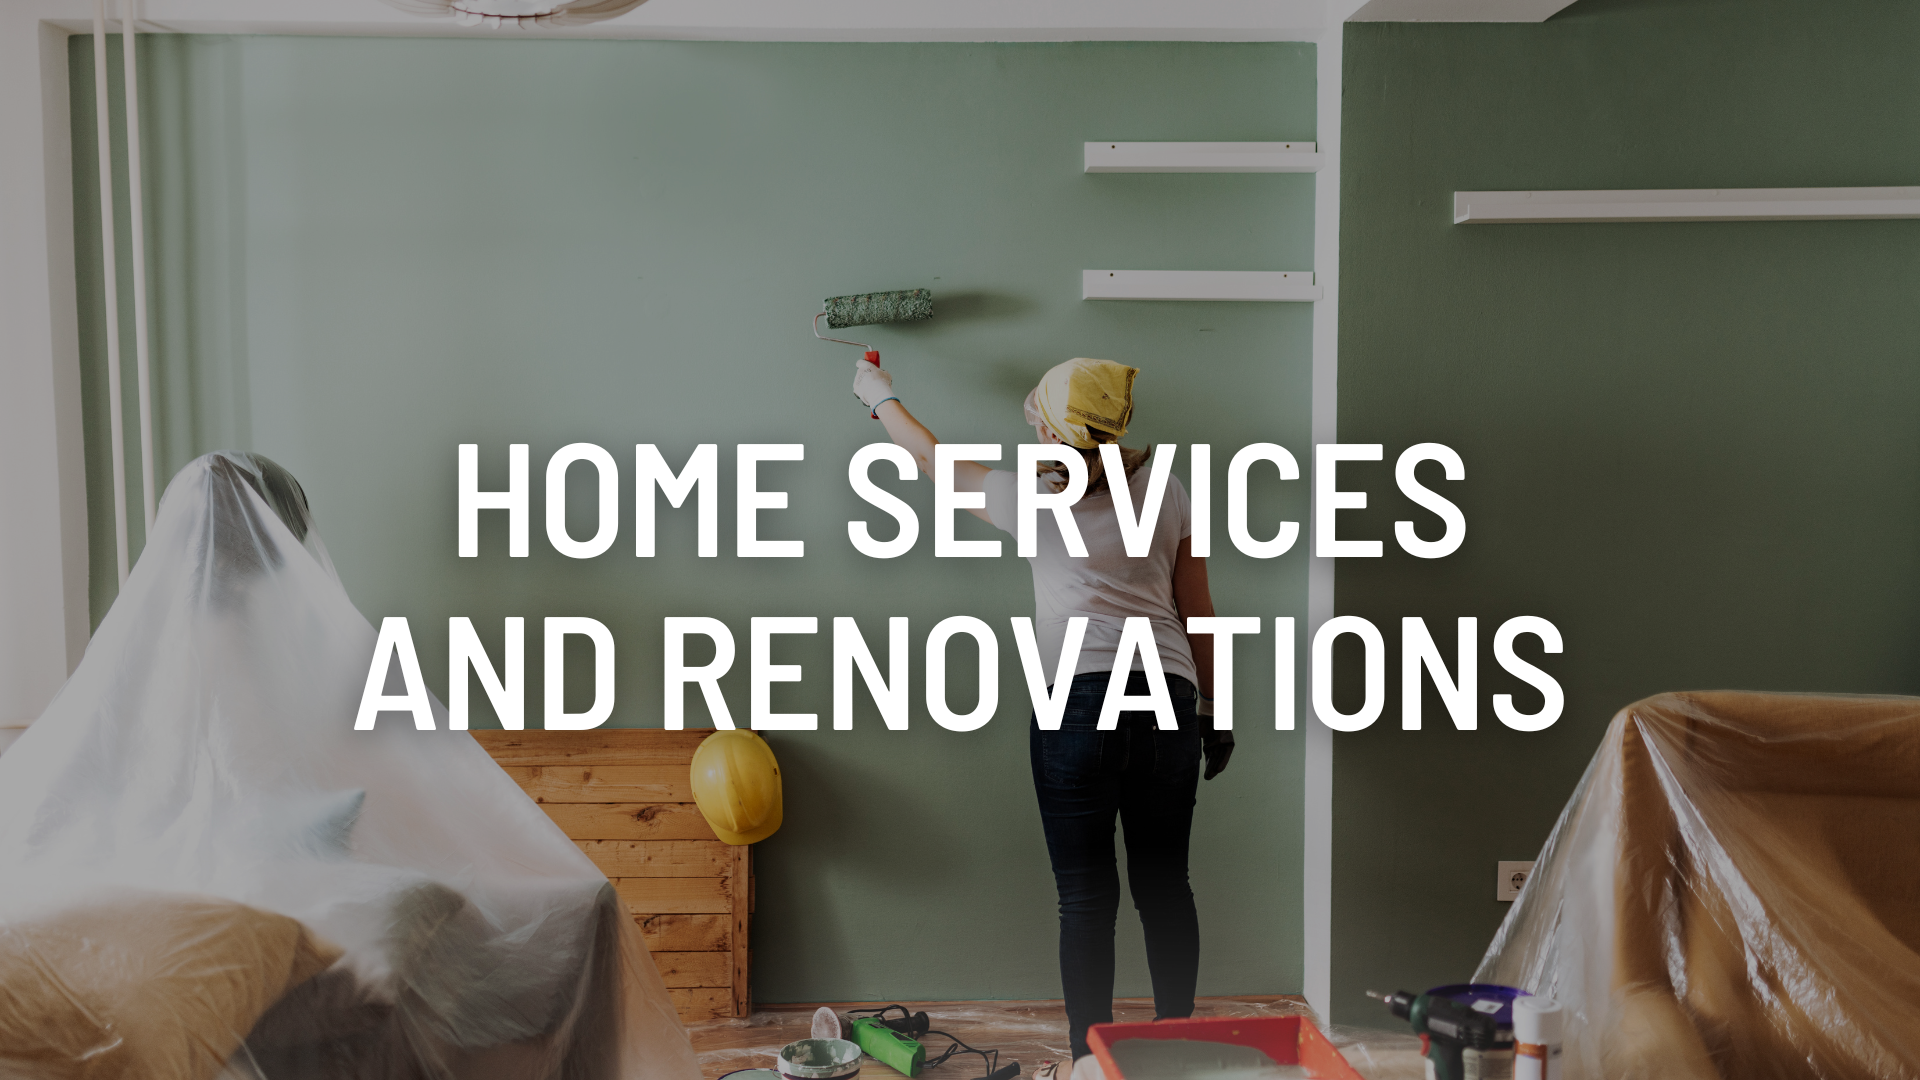 Home Services and Renovations